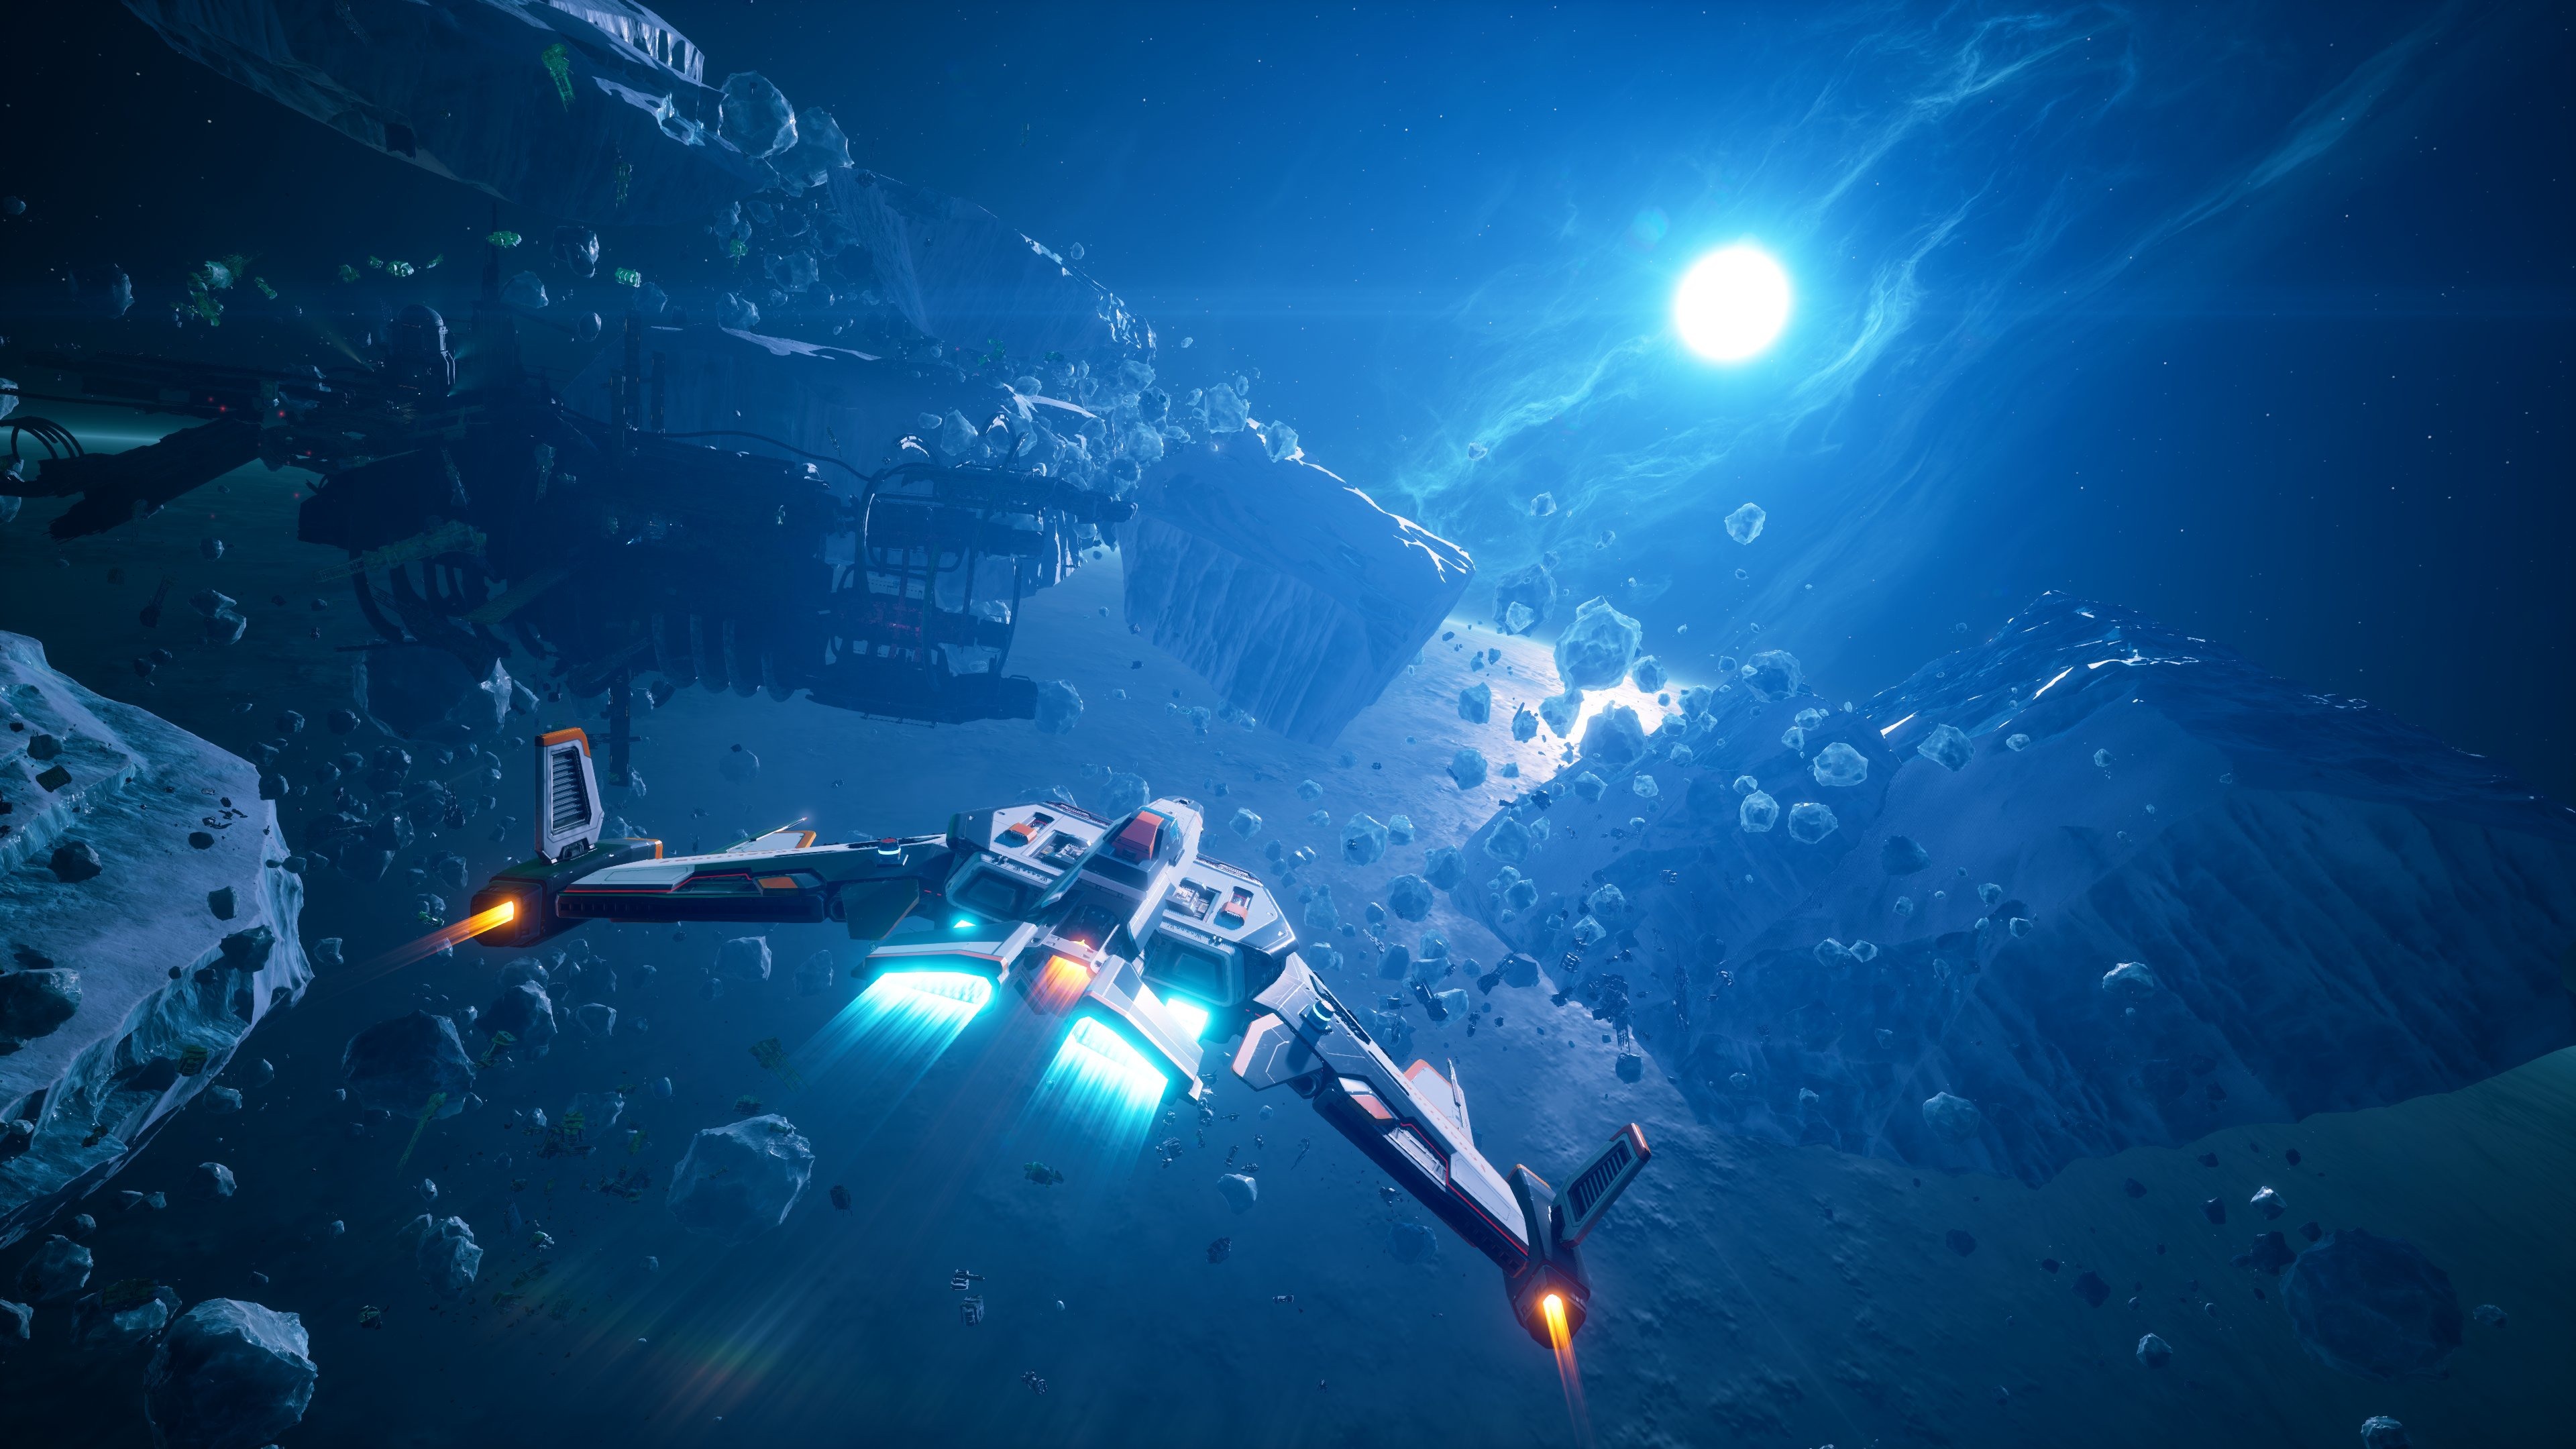 Video Game Everspace 2 HD Wallpaper | Background Image